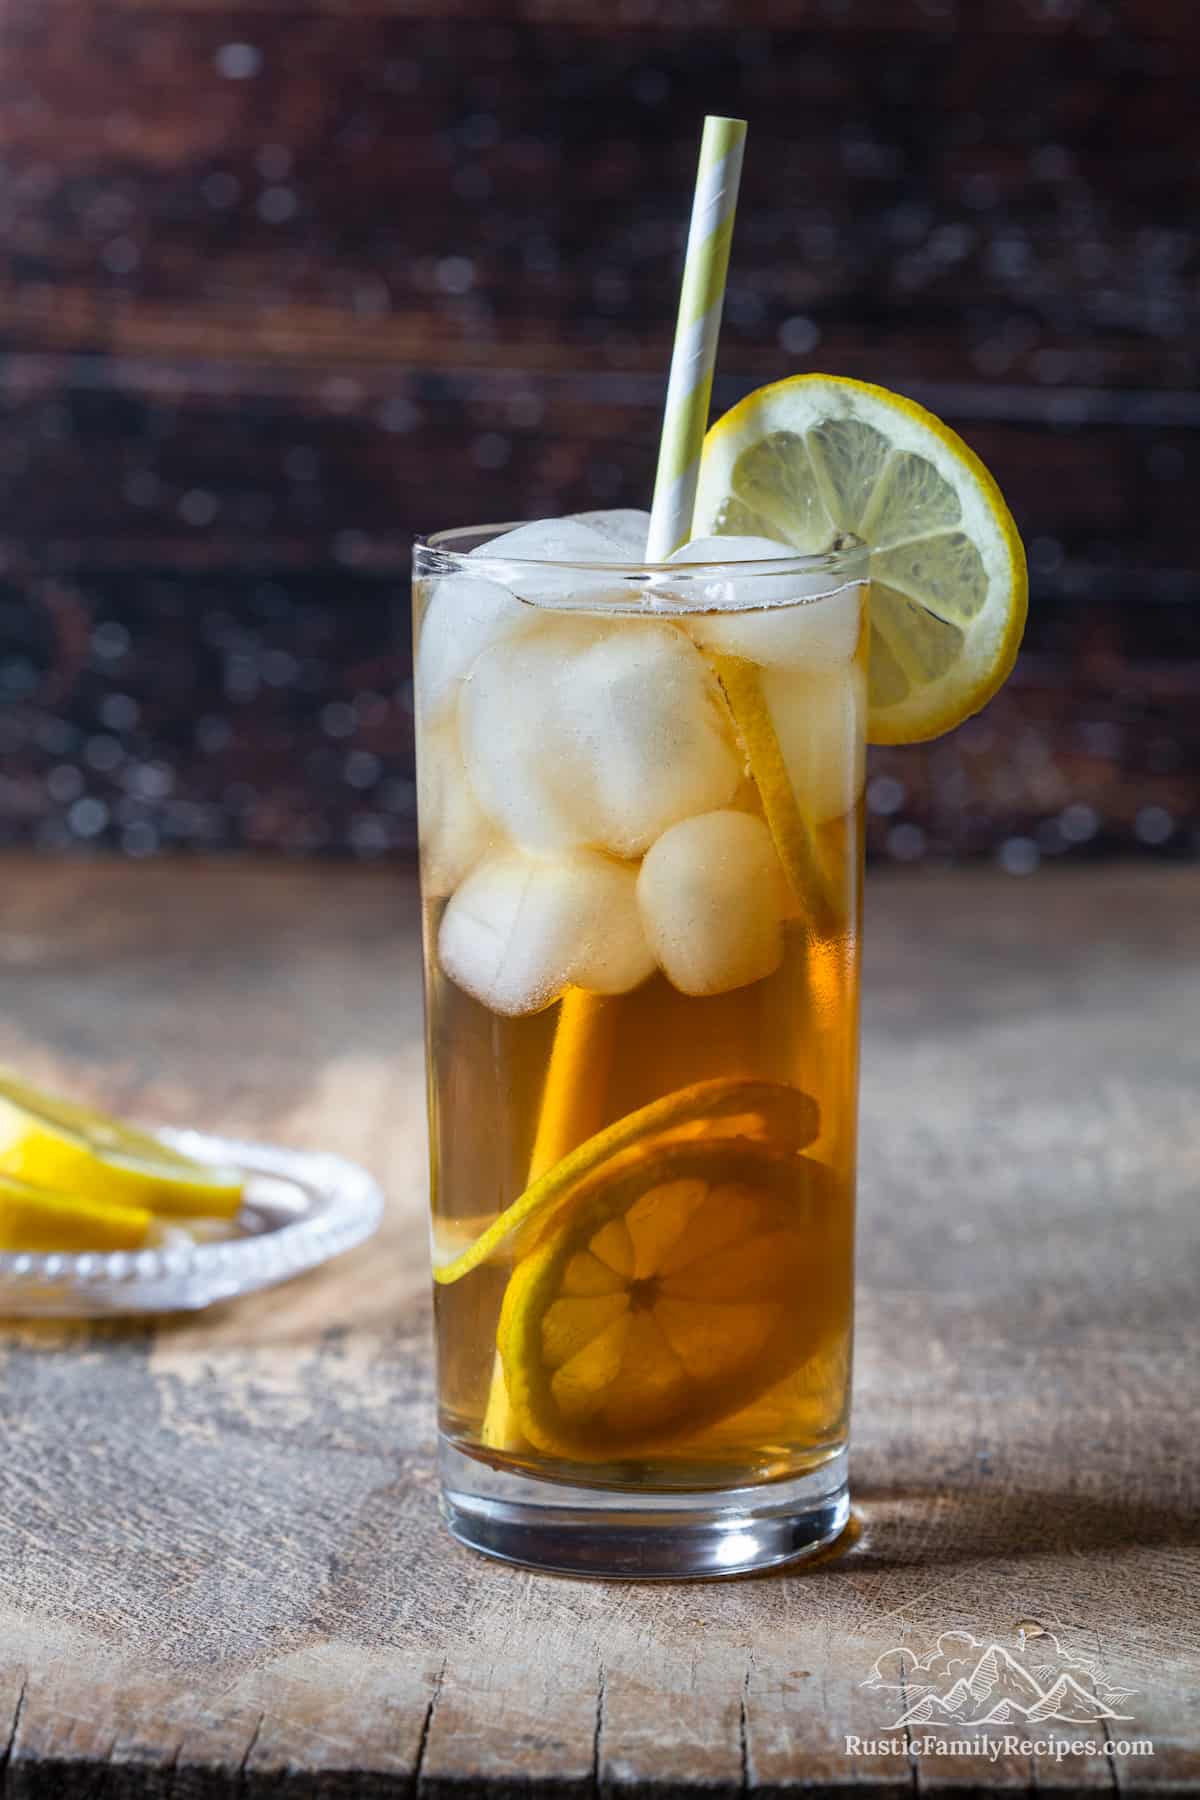 A tall glass filled with arnold palmer drink a lemon, and a straw